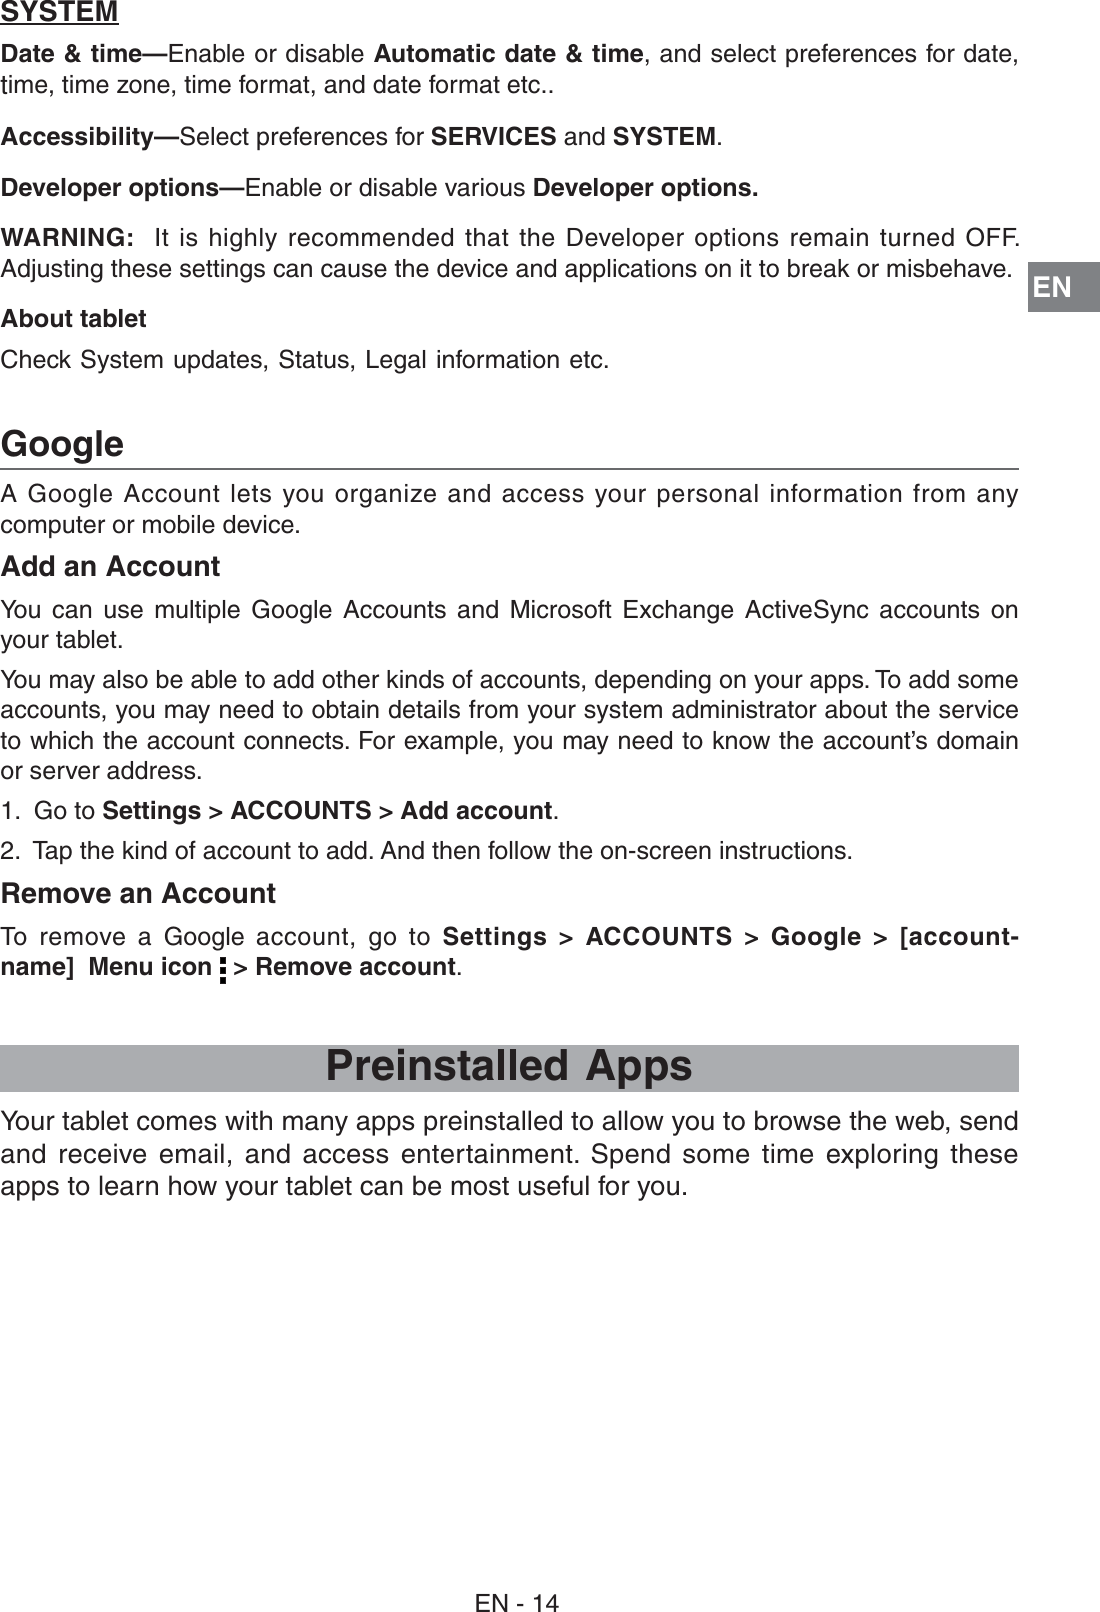 EN%.A Google Account lets you organize and access your personal information from any computer or mobile device. Add an Account9OU CAN USE MULTIPLE &apos;OOGLE !CCOUNTS AND -ICROSOFT %XCHANGE !CTIVE3YNC ACCOUNTS ONyour tablet. 9OUMAYALSOBEABLETOADDOTHERKINDSOFACCOUNTSDEPENDINGONYOURAPPS4OADDSOMEaccounts, you may need to obtain details from your system administrator about the service TOWHICHTHEACCOUNTCONNECTS&amp;OREXAMPLEYOUMAYNEEDTOKNOWTHEACCOUNTSDOMAINor server address.1.  Go to Settings &gt; ACCOUNTS &gt; Add account.2.  Tap the kind of account to add. And then follow the on-screen instructions.Remove an AccountTo remove a Google  account, go to Settings &gt; ACCOUNTS &gt; Google &gt; [account- name]  Menu icon   &gt; Remove account.GooglePreinstalled Apps9OURTABLETCOMESWITHMANYAPPSPREINSTALLEDTOALLOWYOUTOBROWSETHEWEBSENDAND RECEIVE EMAIL AND ACCESS ENTERTAINMENT 3PEND SOME TIME EXPLORING THESEapps to learn how your tablet can be most useful for you.SYSTEMDate &amp; time—Enable or disable Automatic date &amp; time, and select preferences for date, time, time zone, time format, and date format etc..Accessibility—Select preferences for SERVICES and SYSTEM.Developer options—Enable or disable various Developer options.WARNING:  )TISHIGHLY RECOMMENDED THATTHE $EVELOPEROPTIONSREMAIN TURNED /&amp;&amp;Adjusting these settings can cause the device and applications on it to break or misbehave.About tablet Check System updates, Status, Legal information etc.  